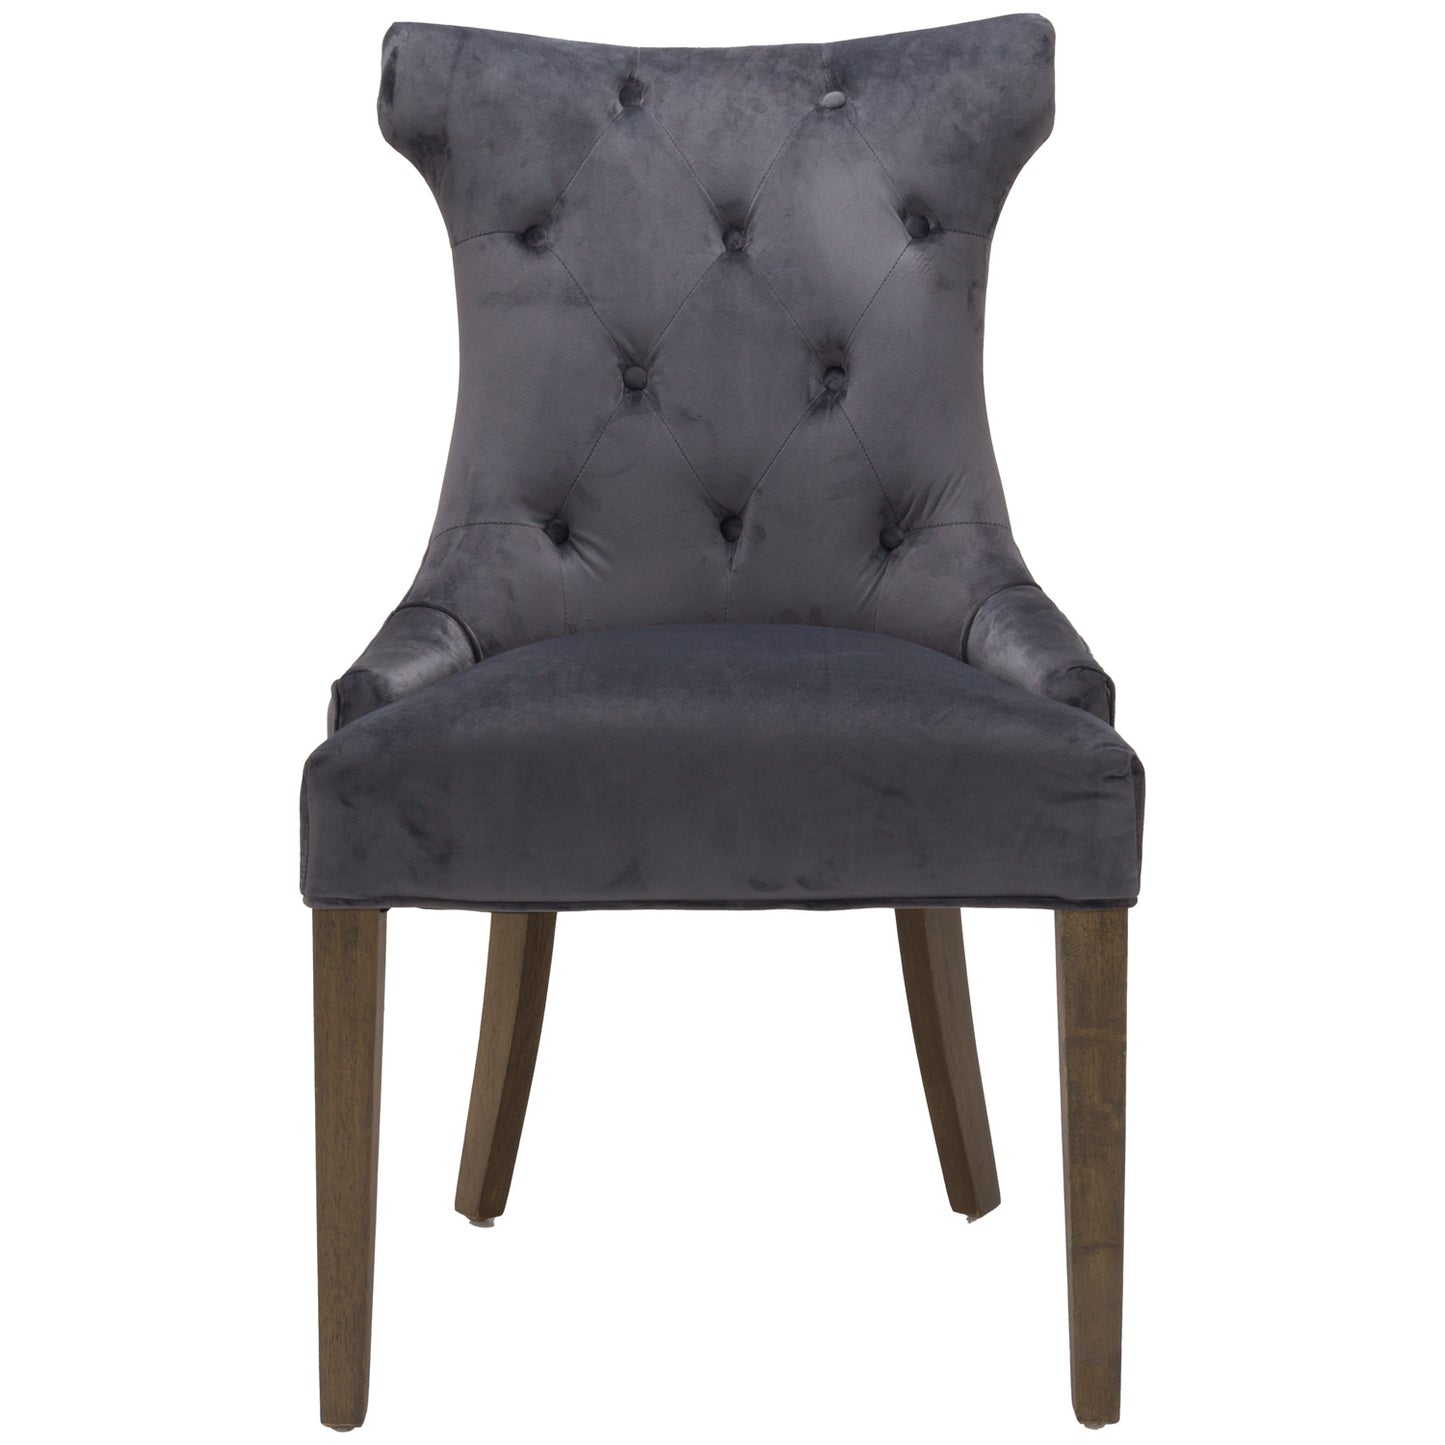 Knightsbridge High Wing Ring Backed Dining Chair